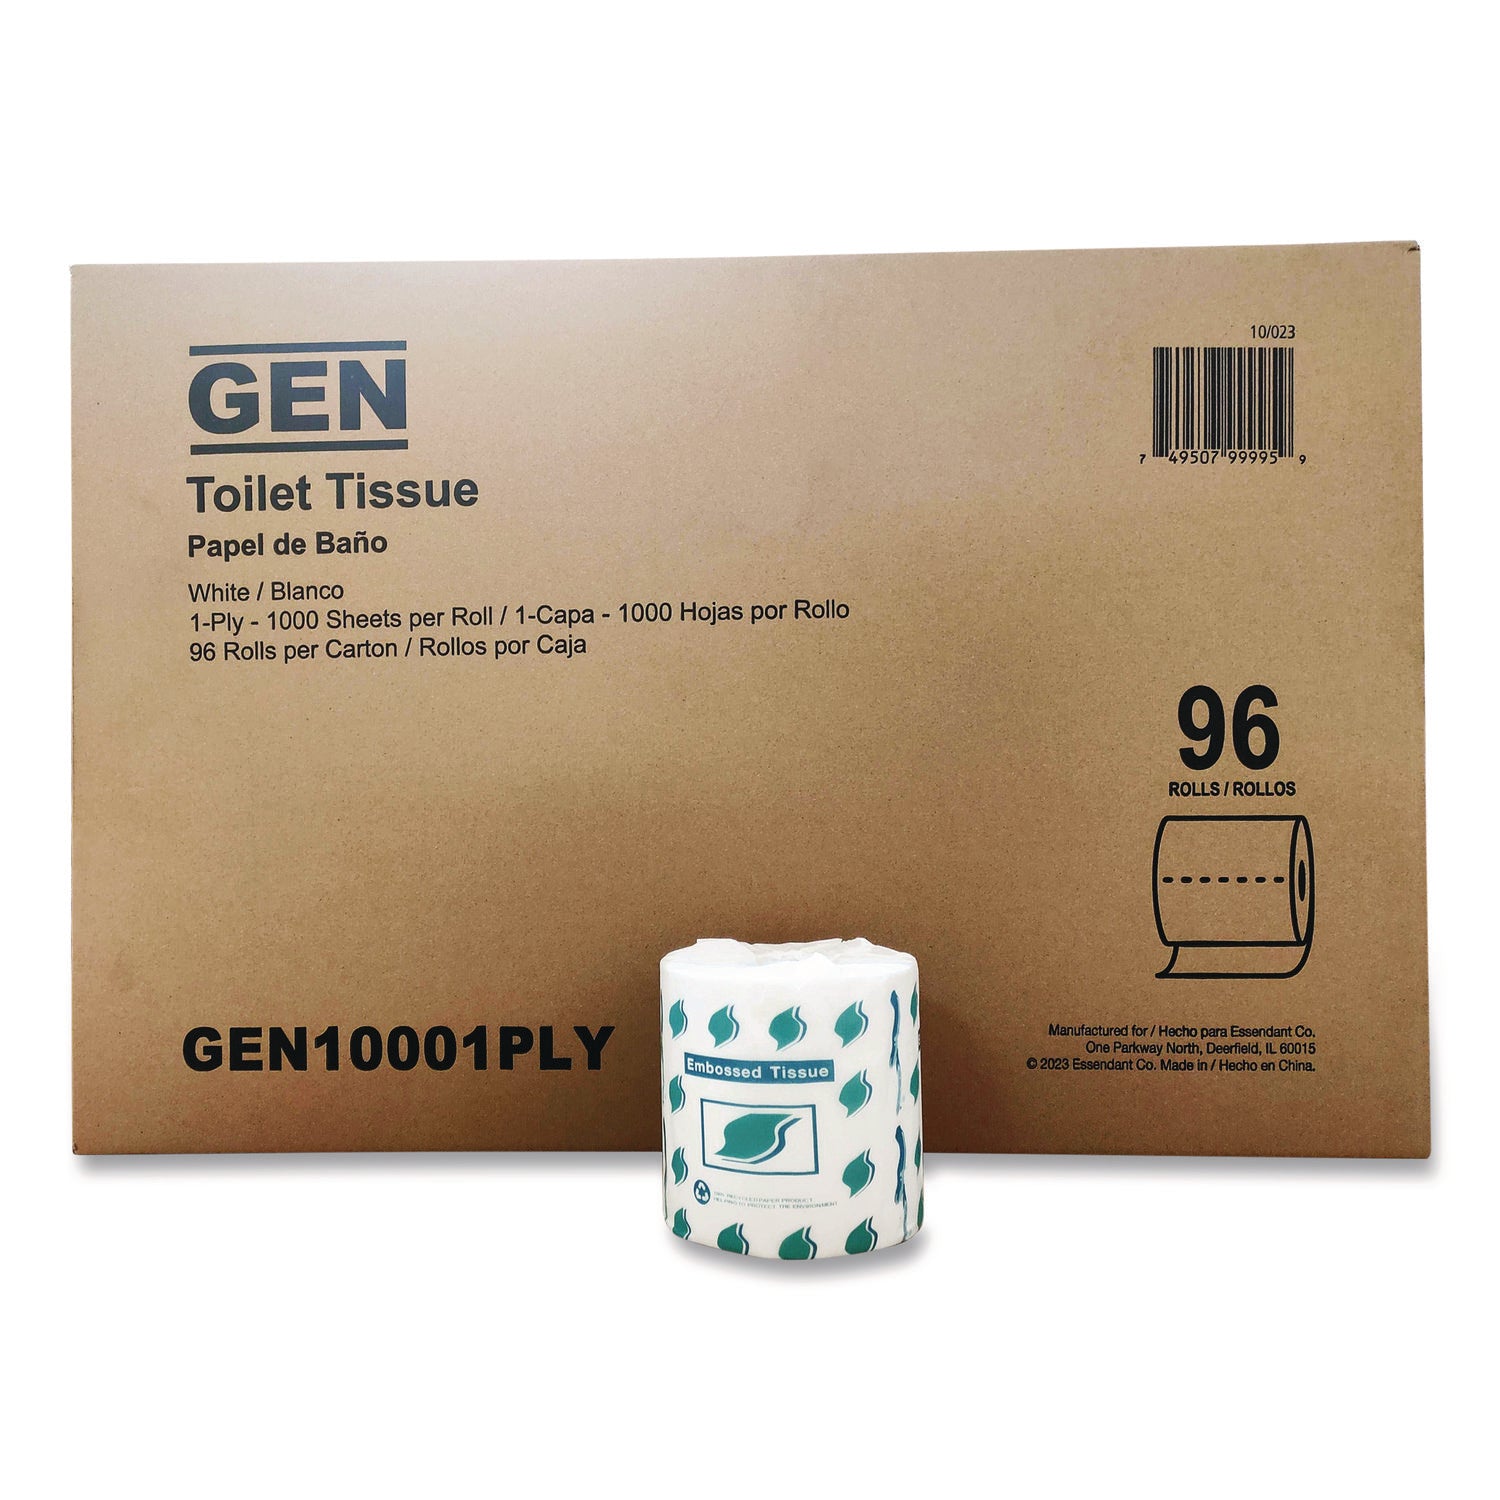 small-roll-bath-tissue-septic-safe-1-ply-white-1000-sheets-roll-96-rolls-carton_gen10001ply - 1